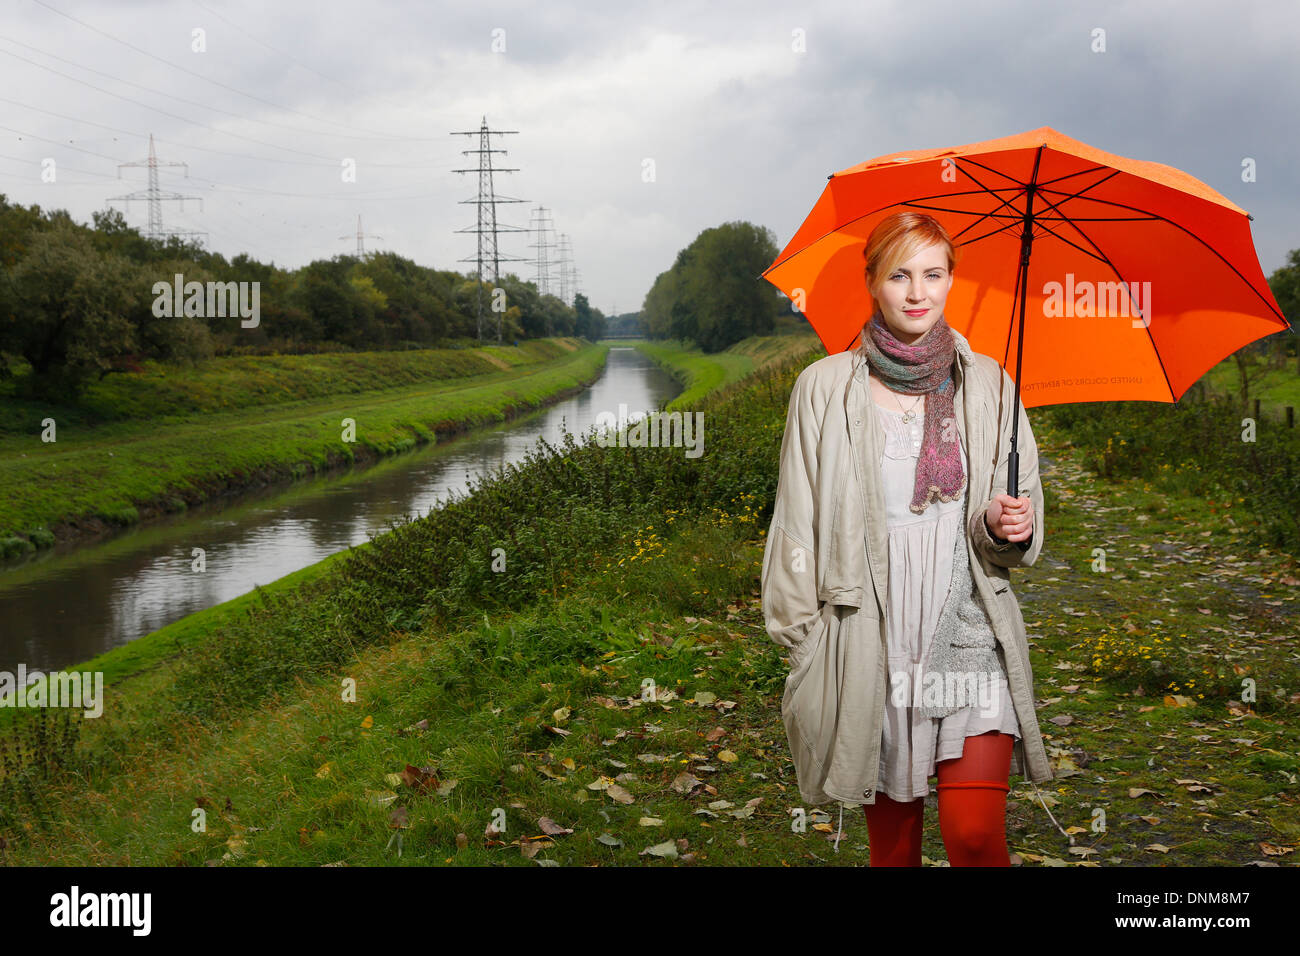 Oberhausen, Germany, a young woman walks in the rain with umbrella walking along the Emscher Stock Photo